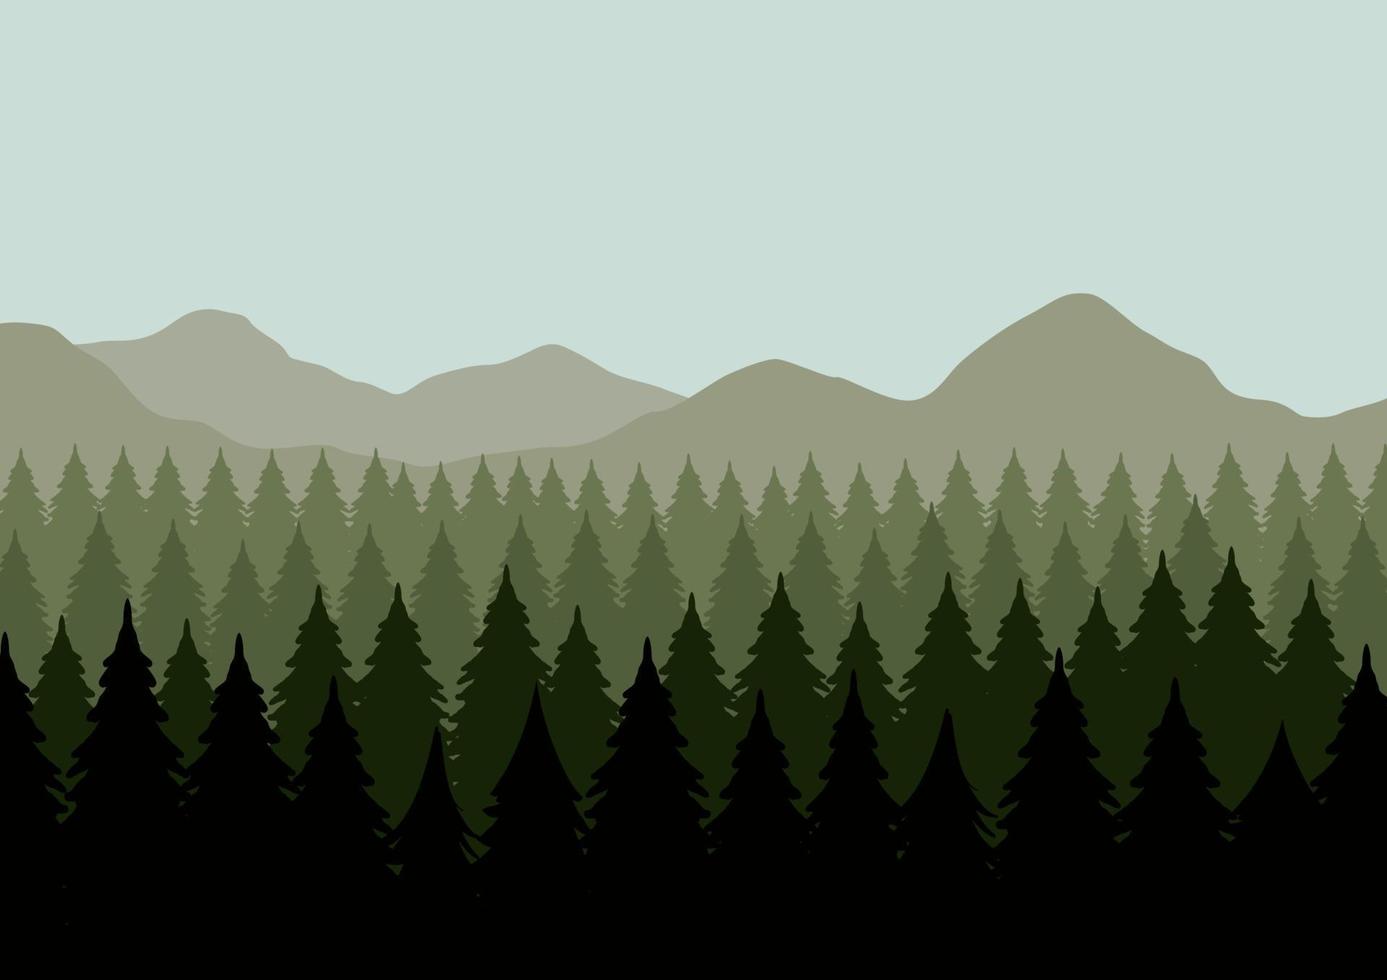 Pine trees and mountains. Vector illustration of a coniferous forest.